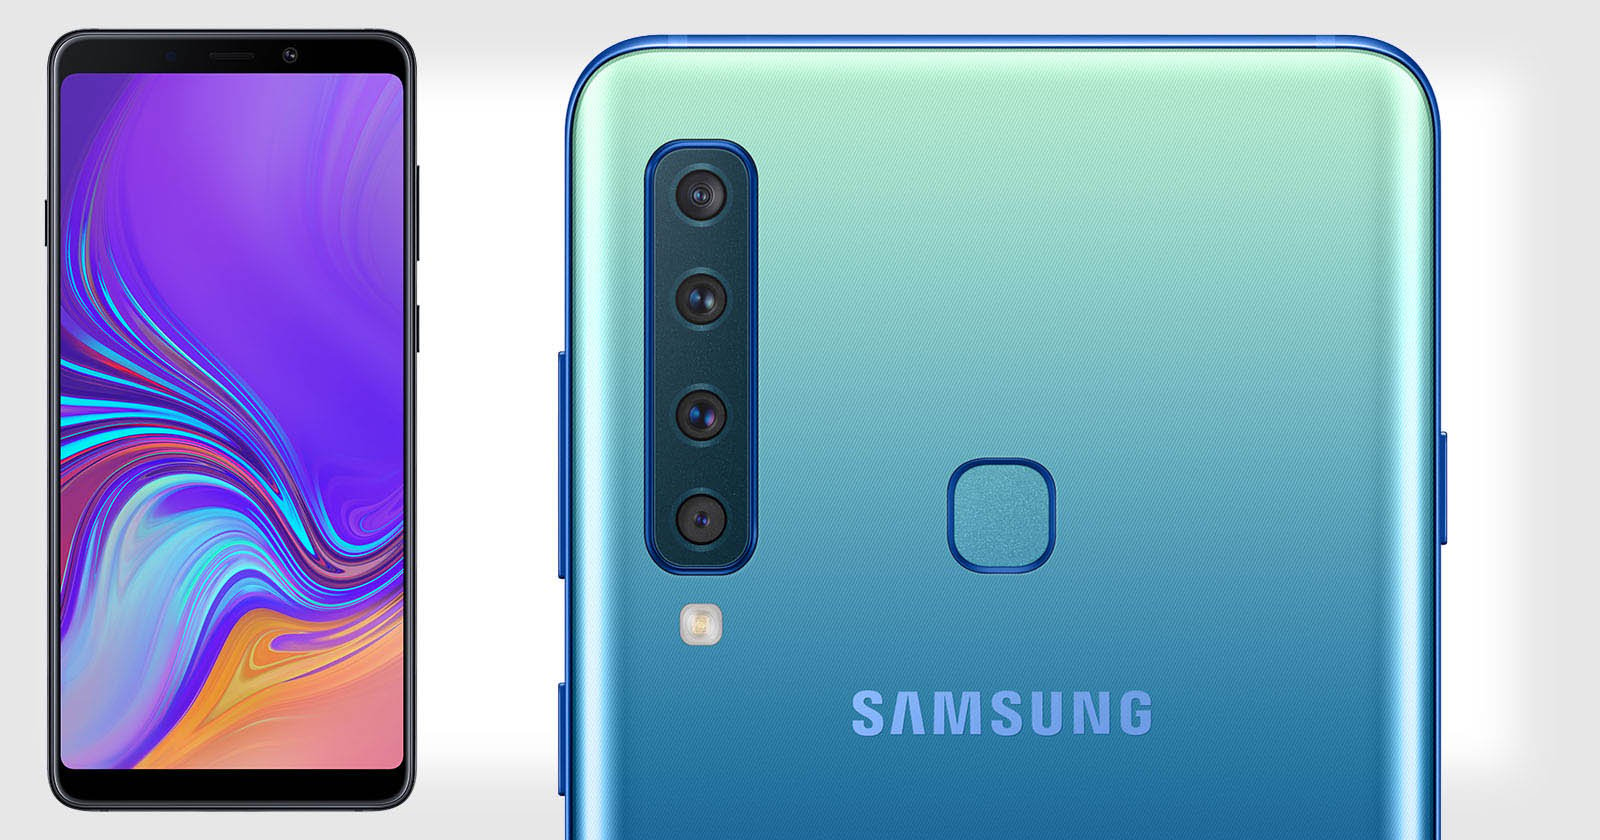 Samsung Galaxy A9 (2018) - Full phone specifications